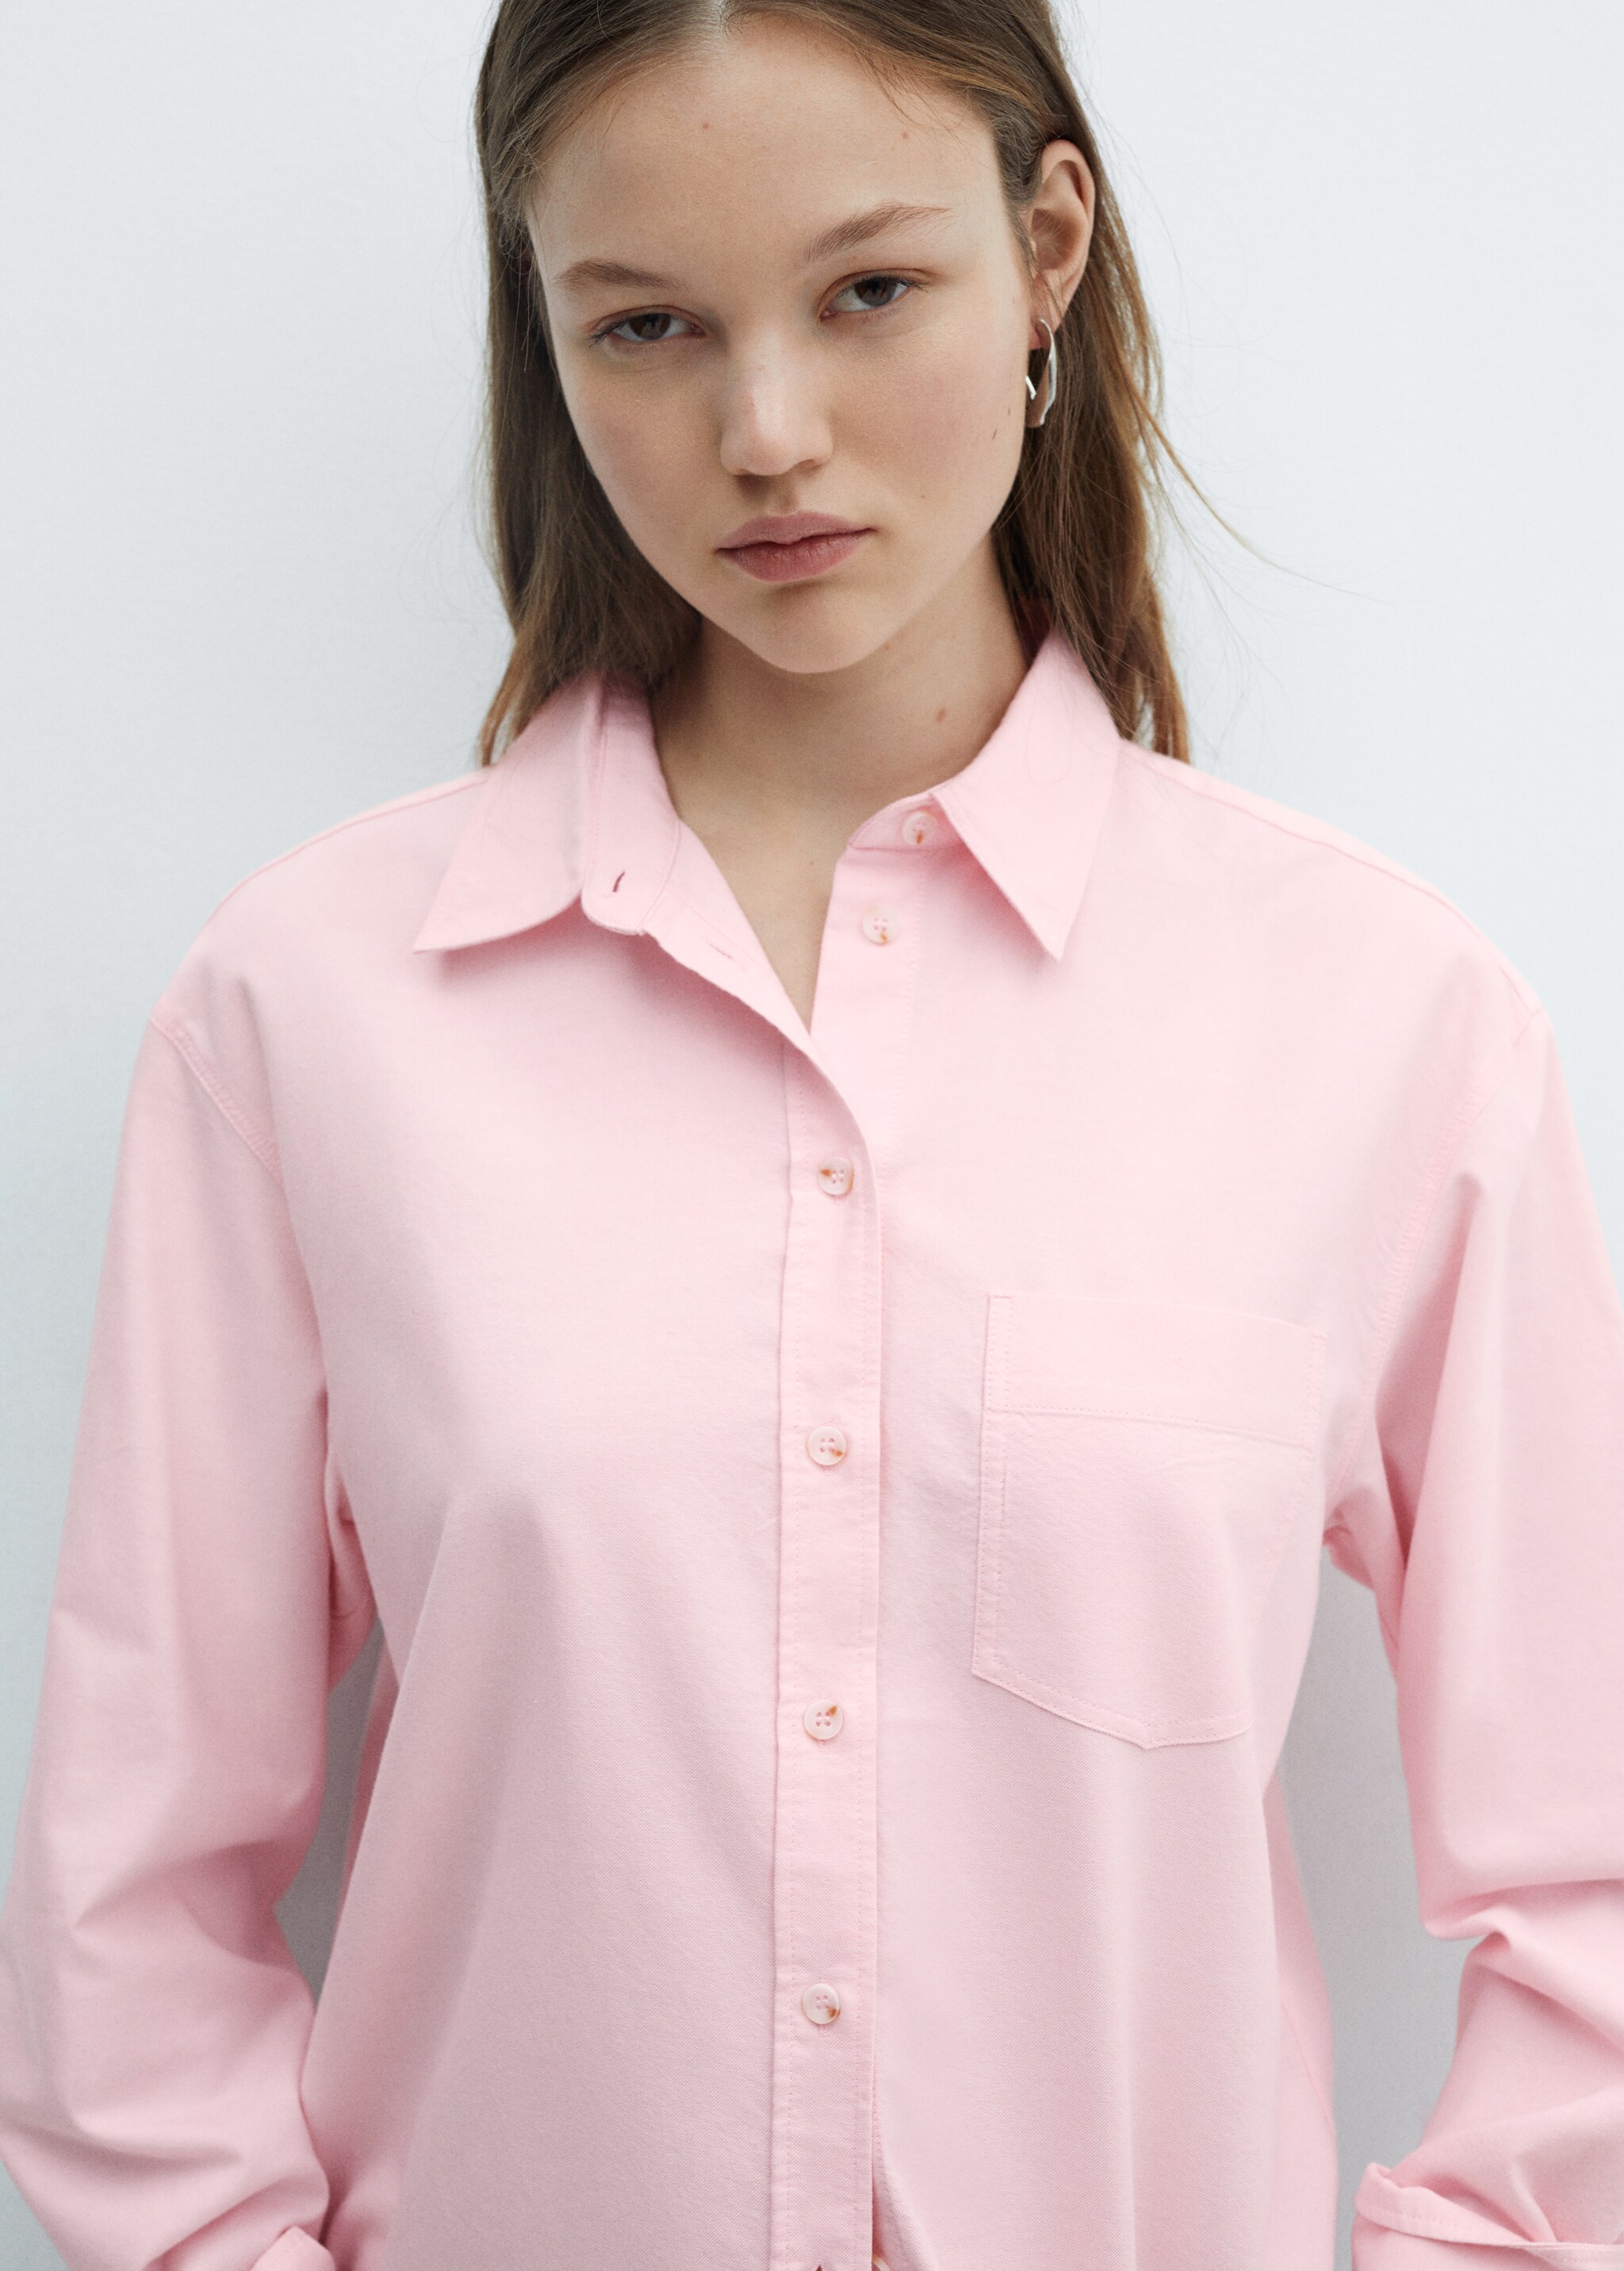 100% cotton pocket shirt - Details of the article 1